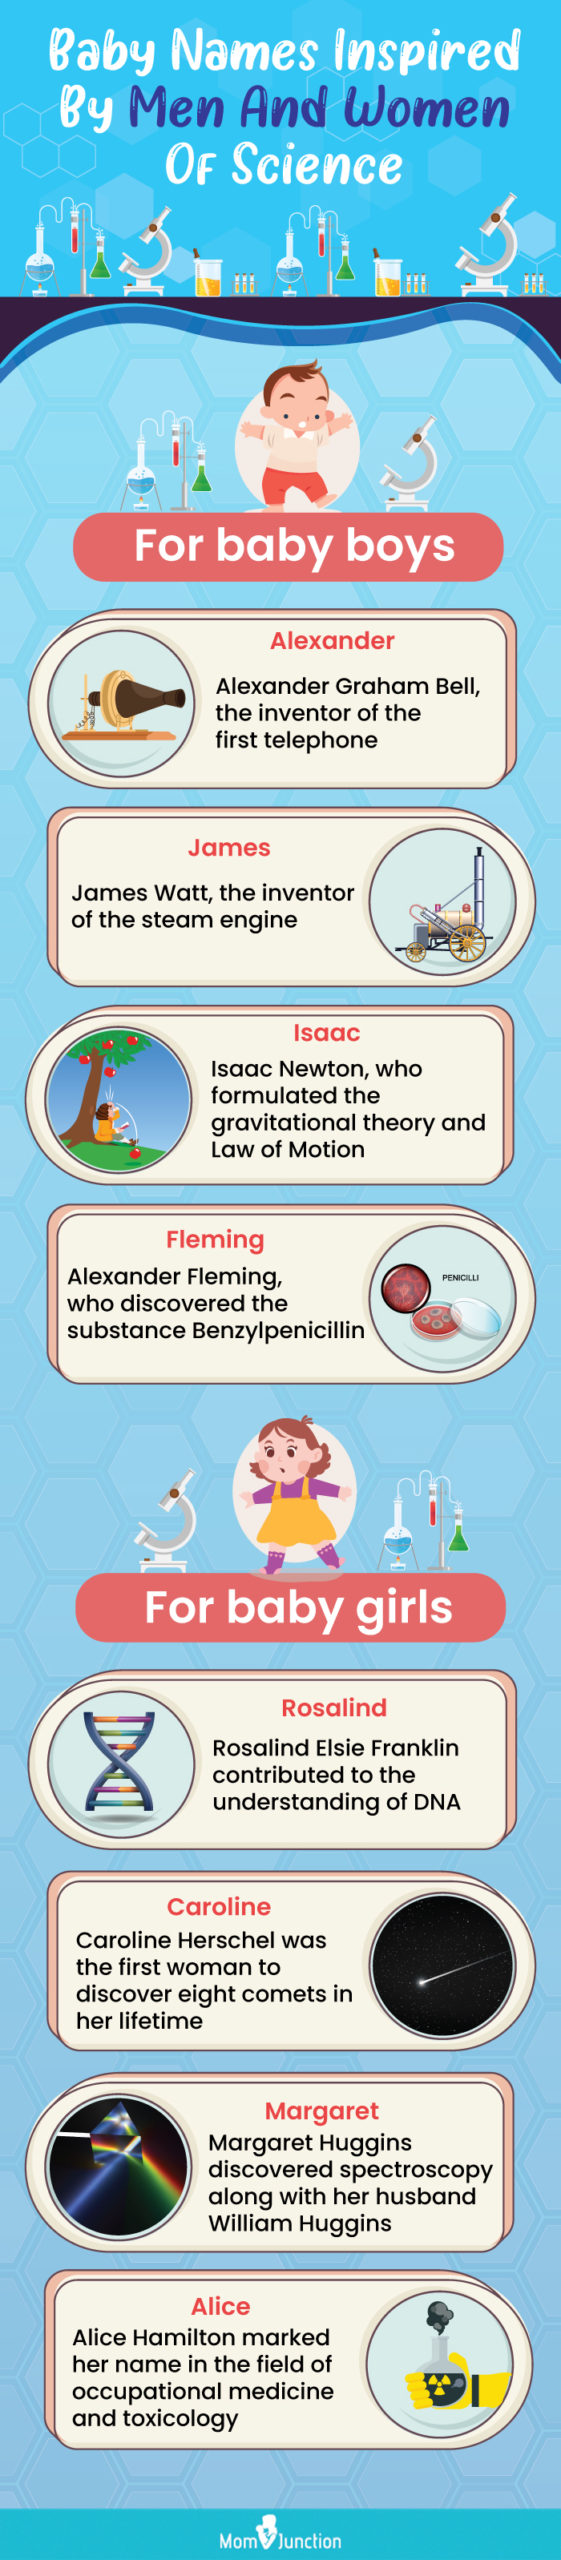 baby names inspired by man and woman of science (infographic)